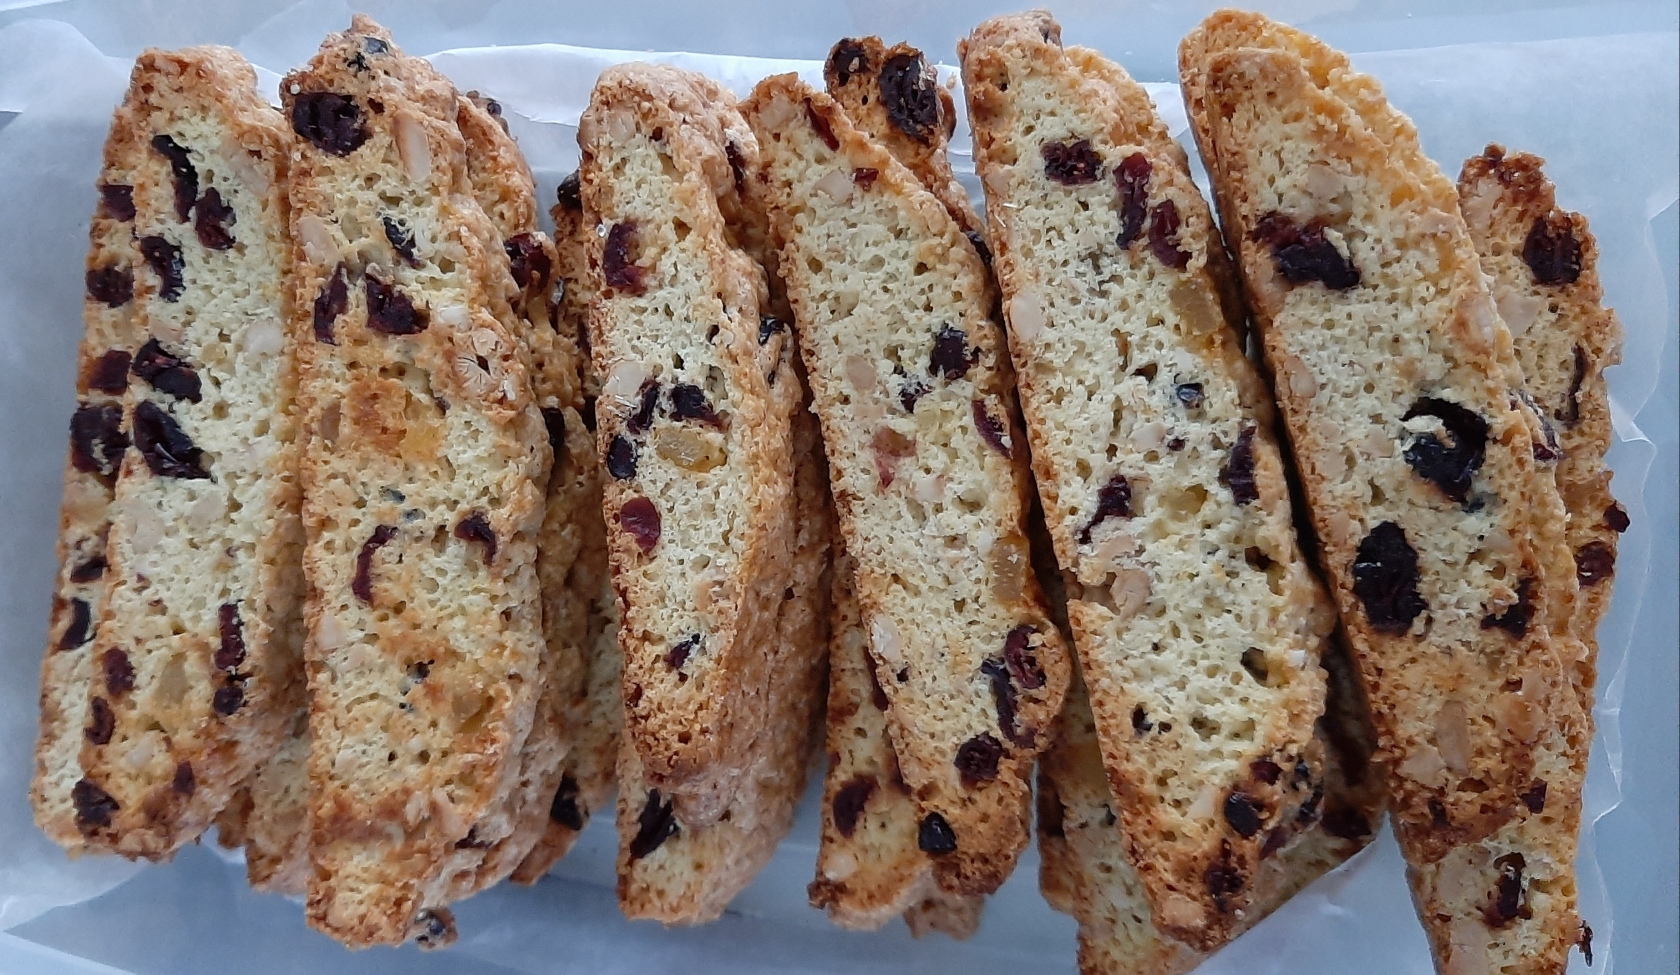 Biscotti with Ginger, Orange and Cashews – Buen provecho…2021